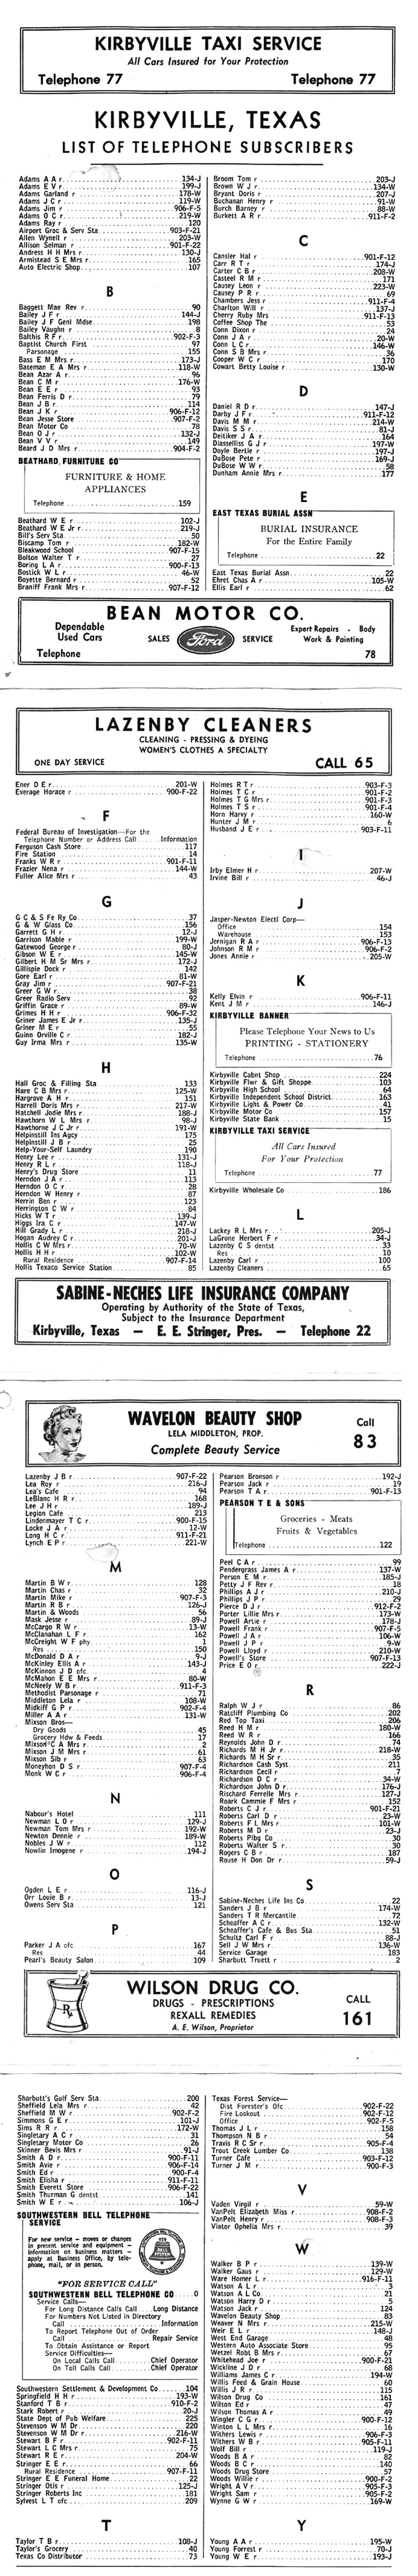 Kirbyville Telephone Subscribers, 1948